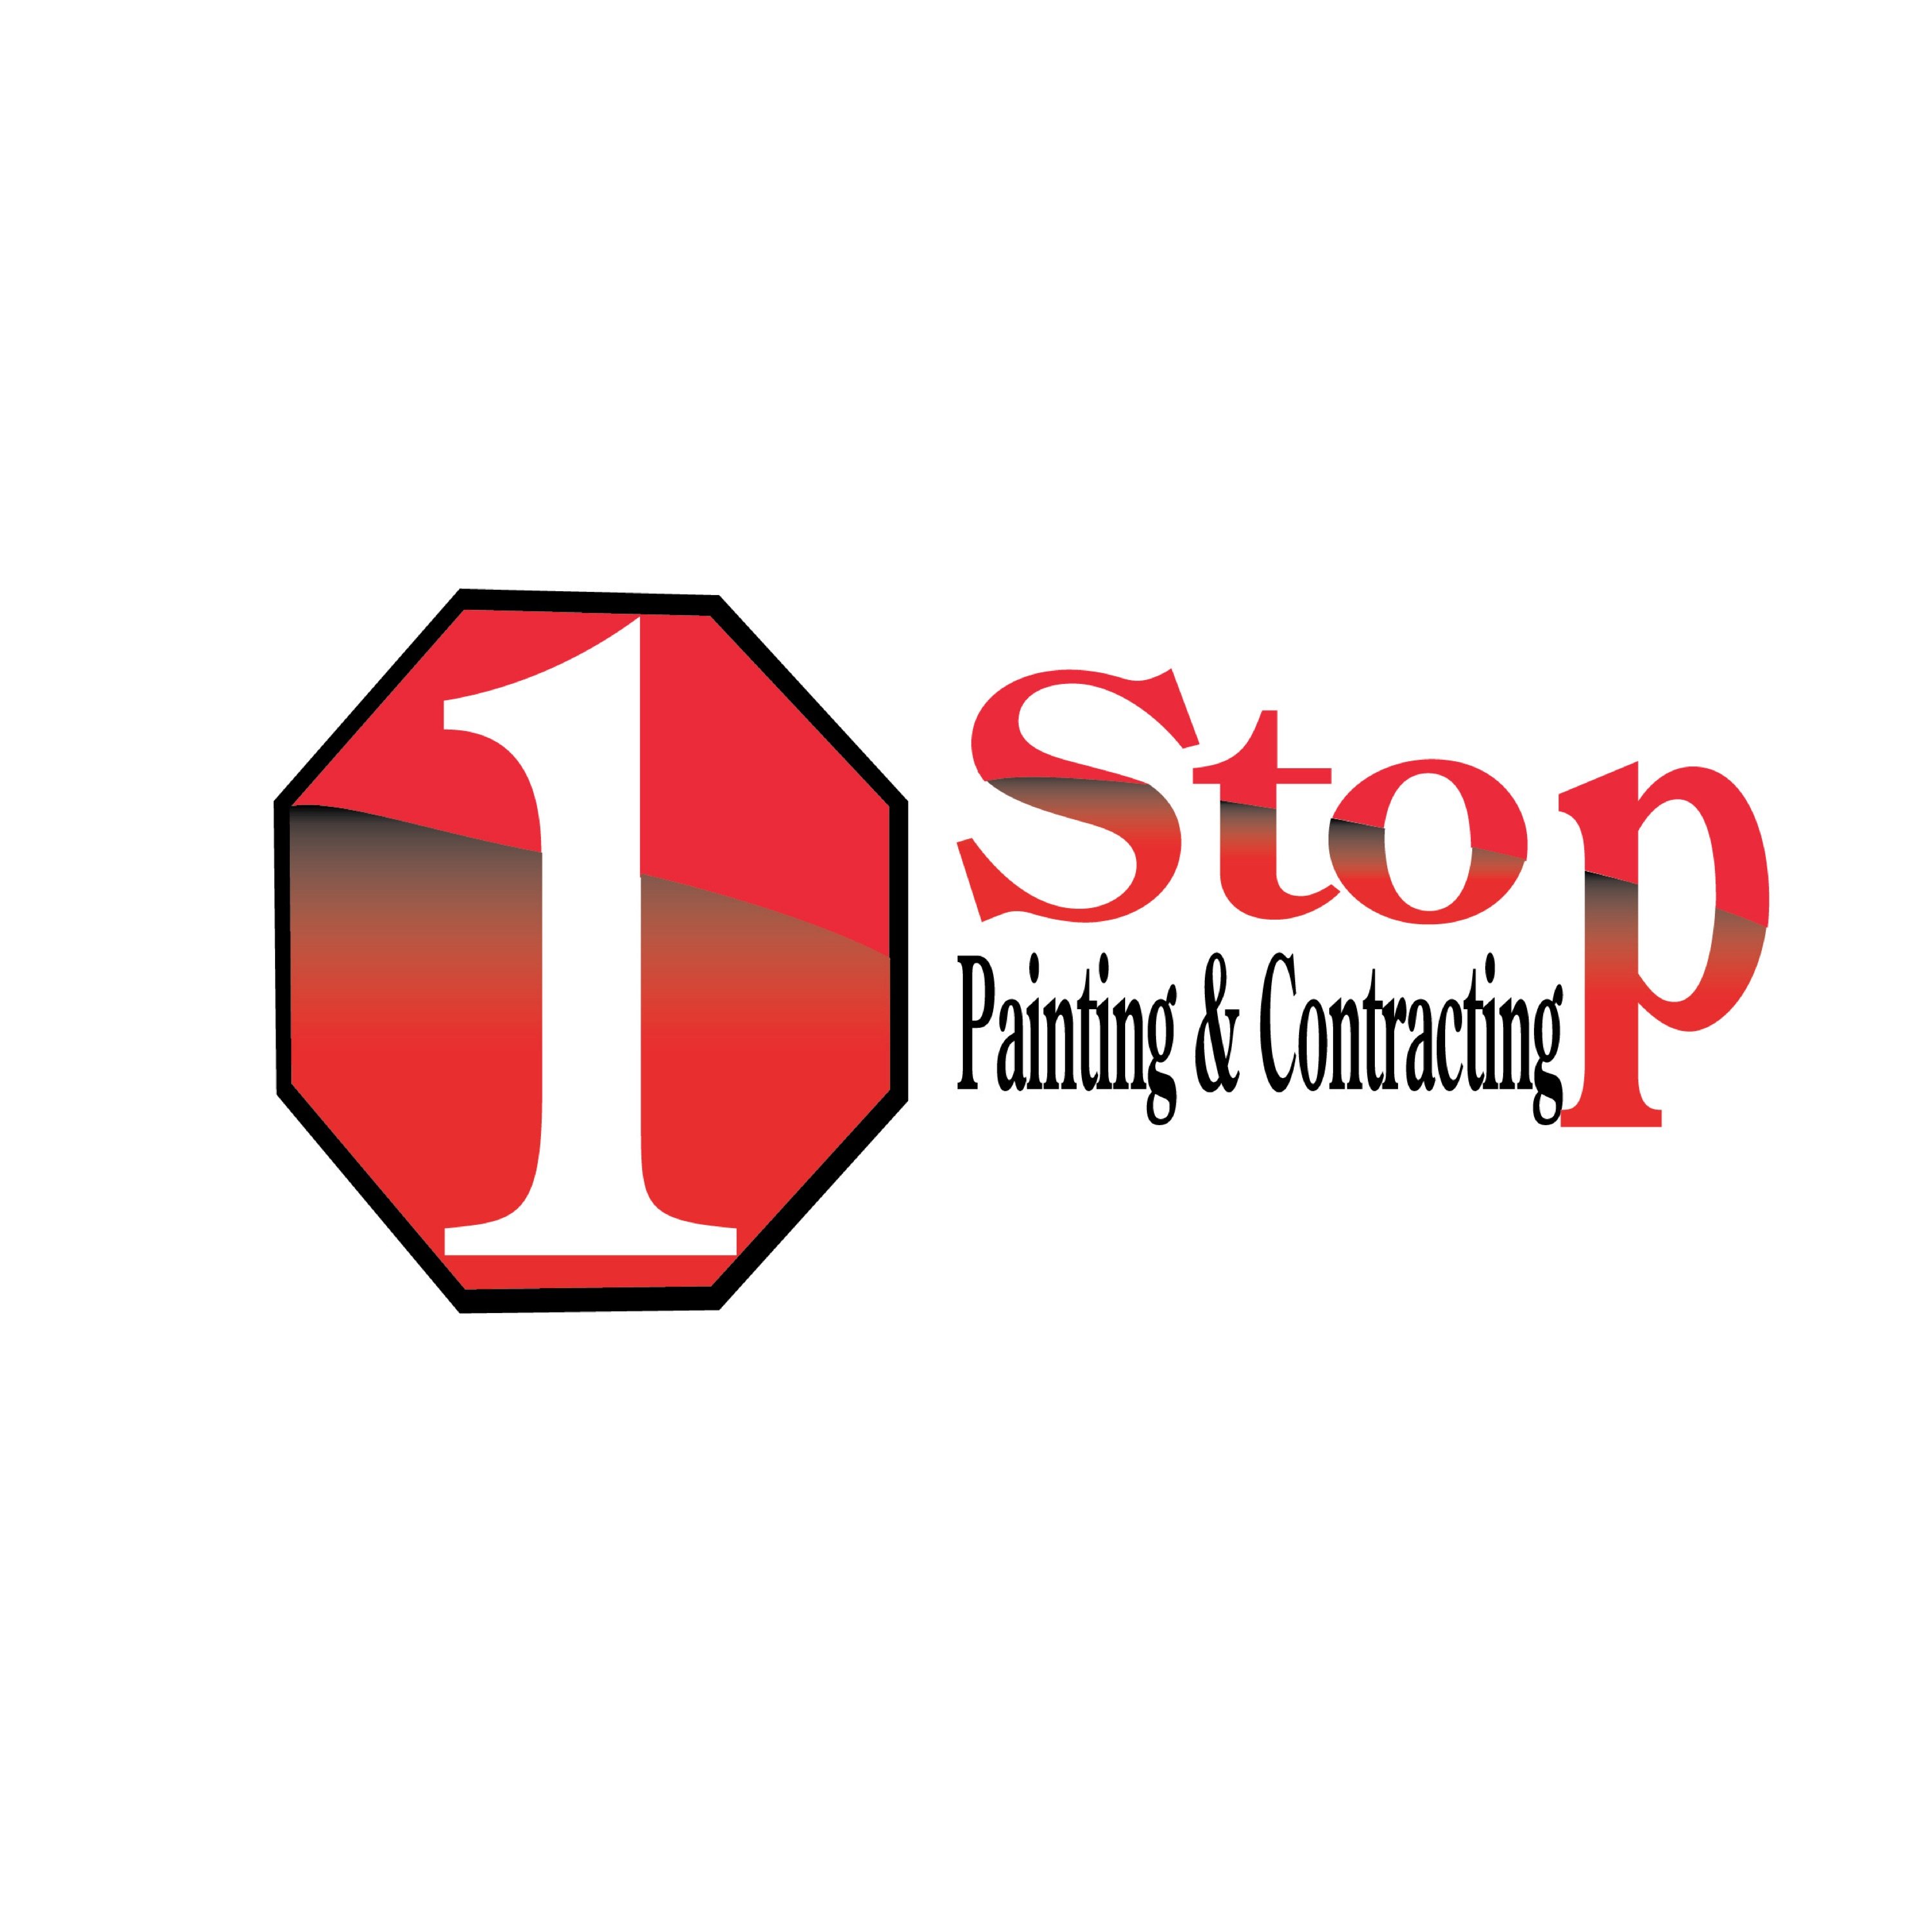 1 Stop Painting & Contracting Logo